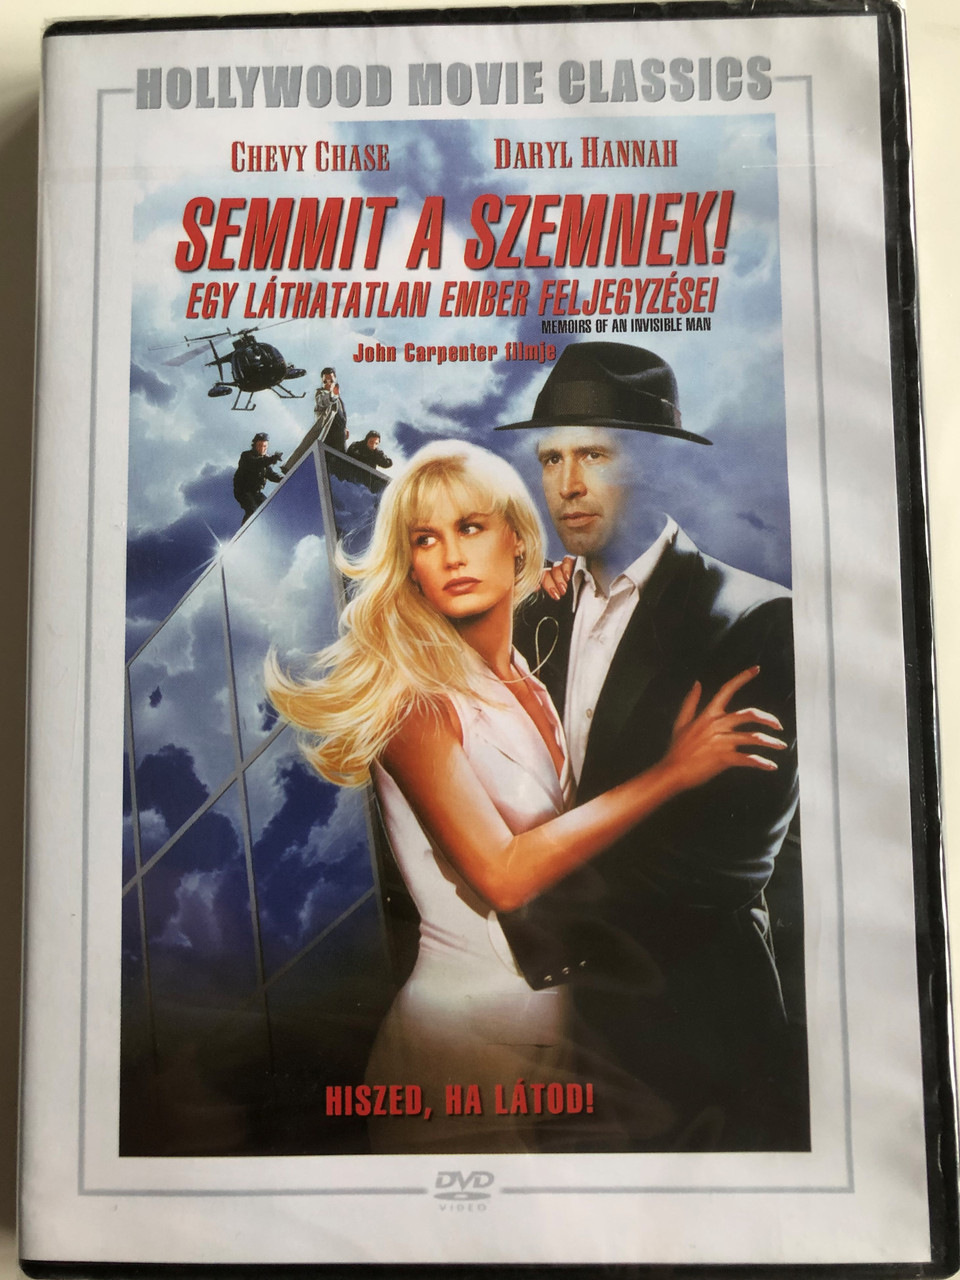 Memoirs of an Invisible Man DVD 1992 Semmit a Szemnek! / Directed by John  Carpenter / Starring: Chevy Chase, Daryl Hannah / Hollywood Classics -  bibleinmylanguage